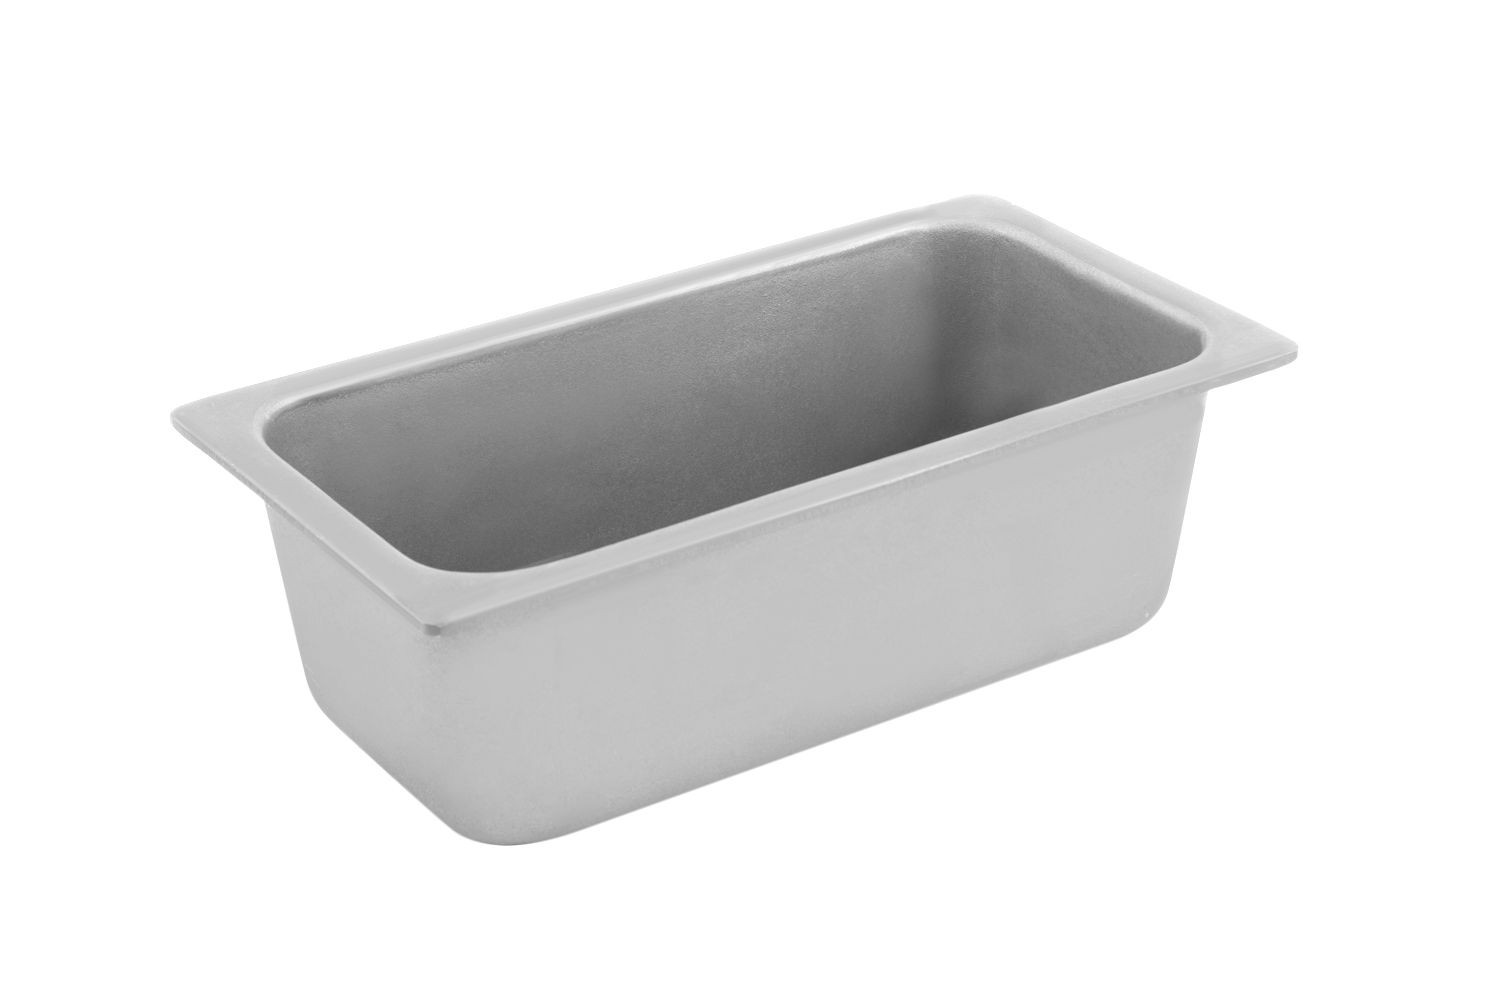 Bon Chef 5089P 1/3 Size Chafer Food Pan, Pewter Glo 4" Deep